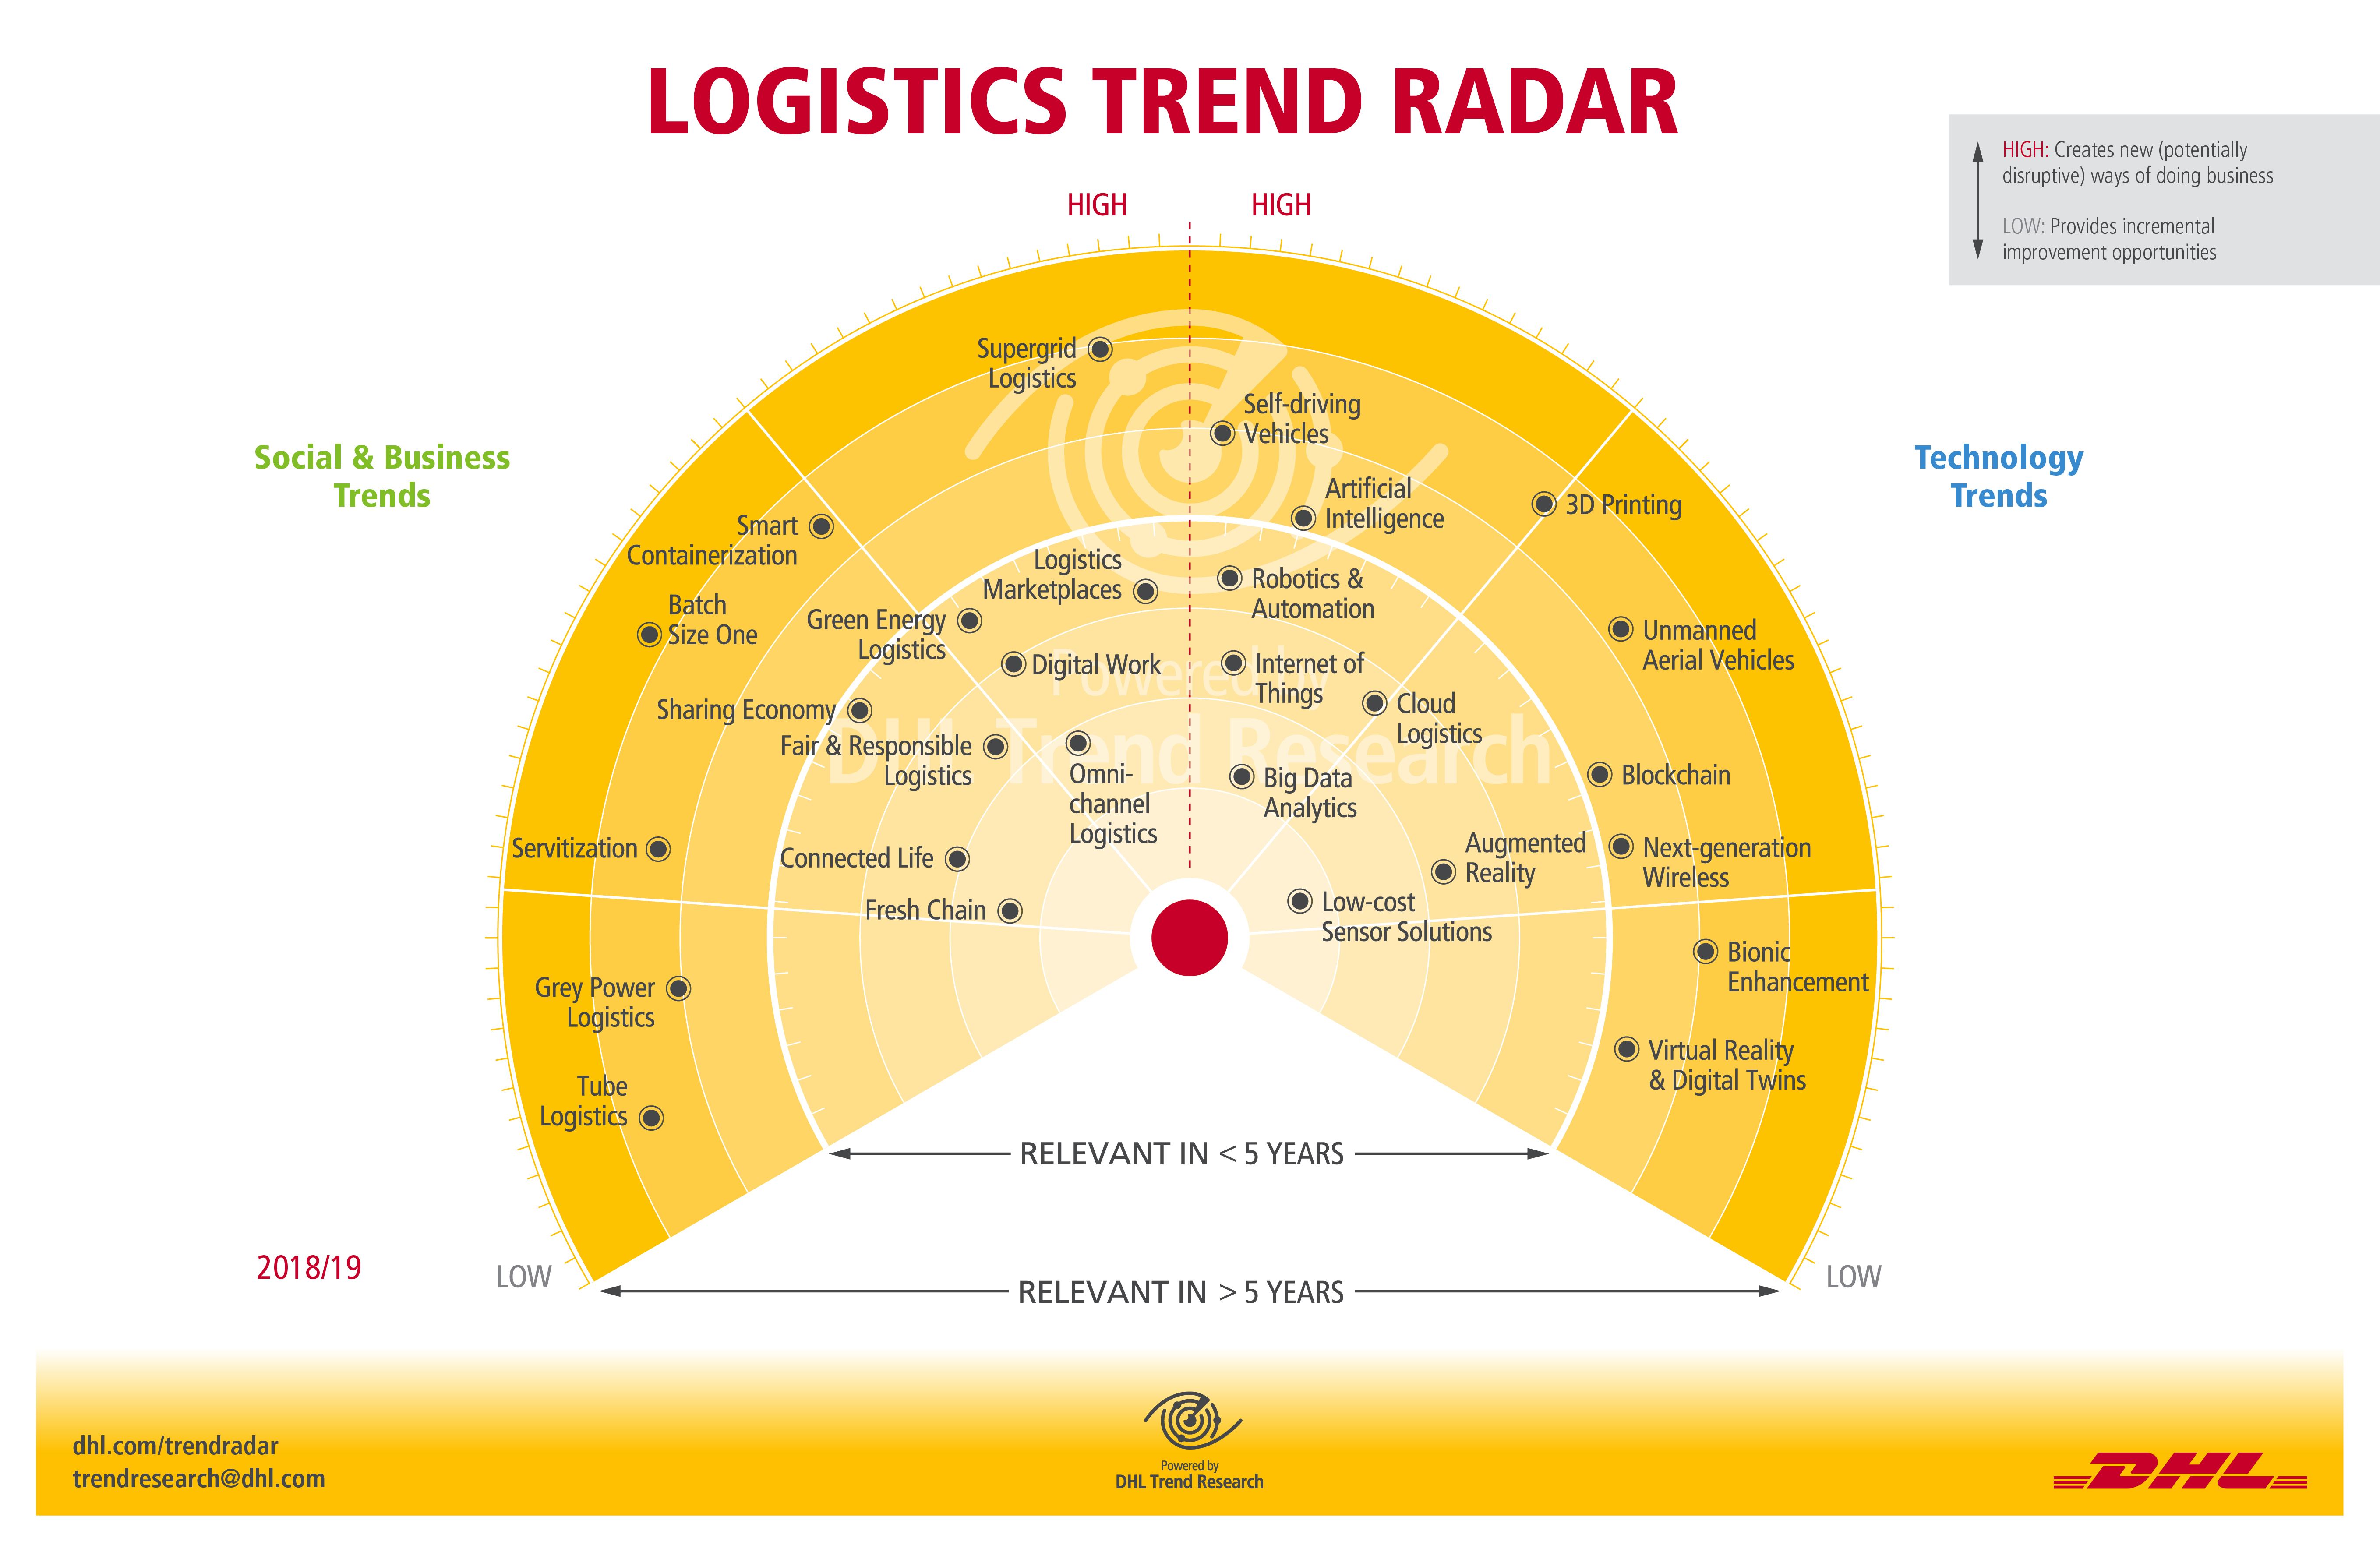 DHL illuminates 28 key trends in the global logistics industry